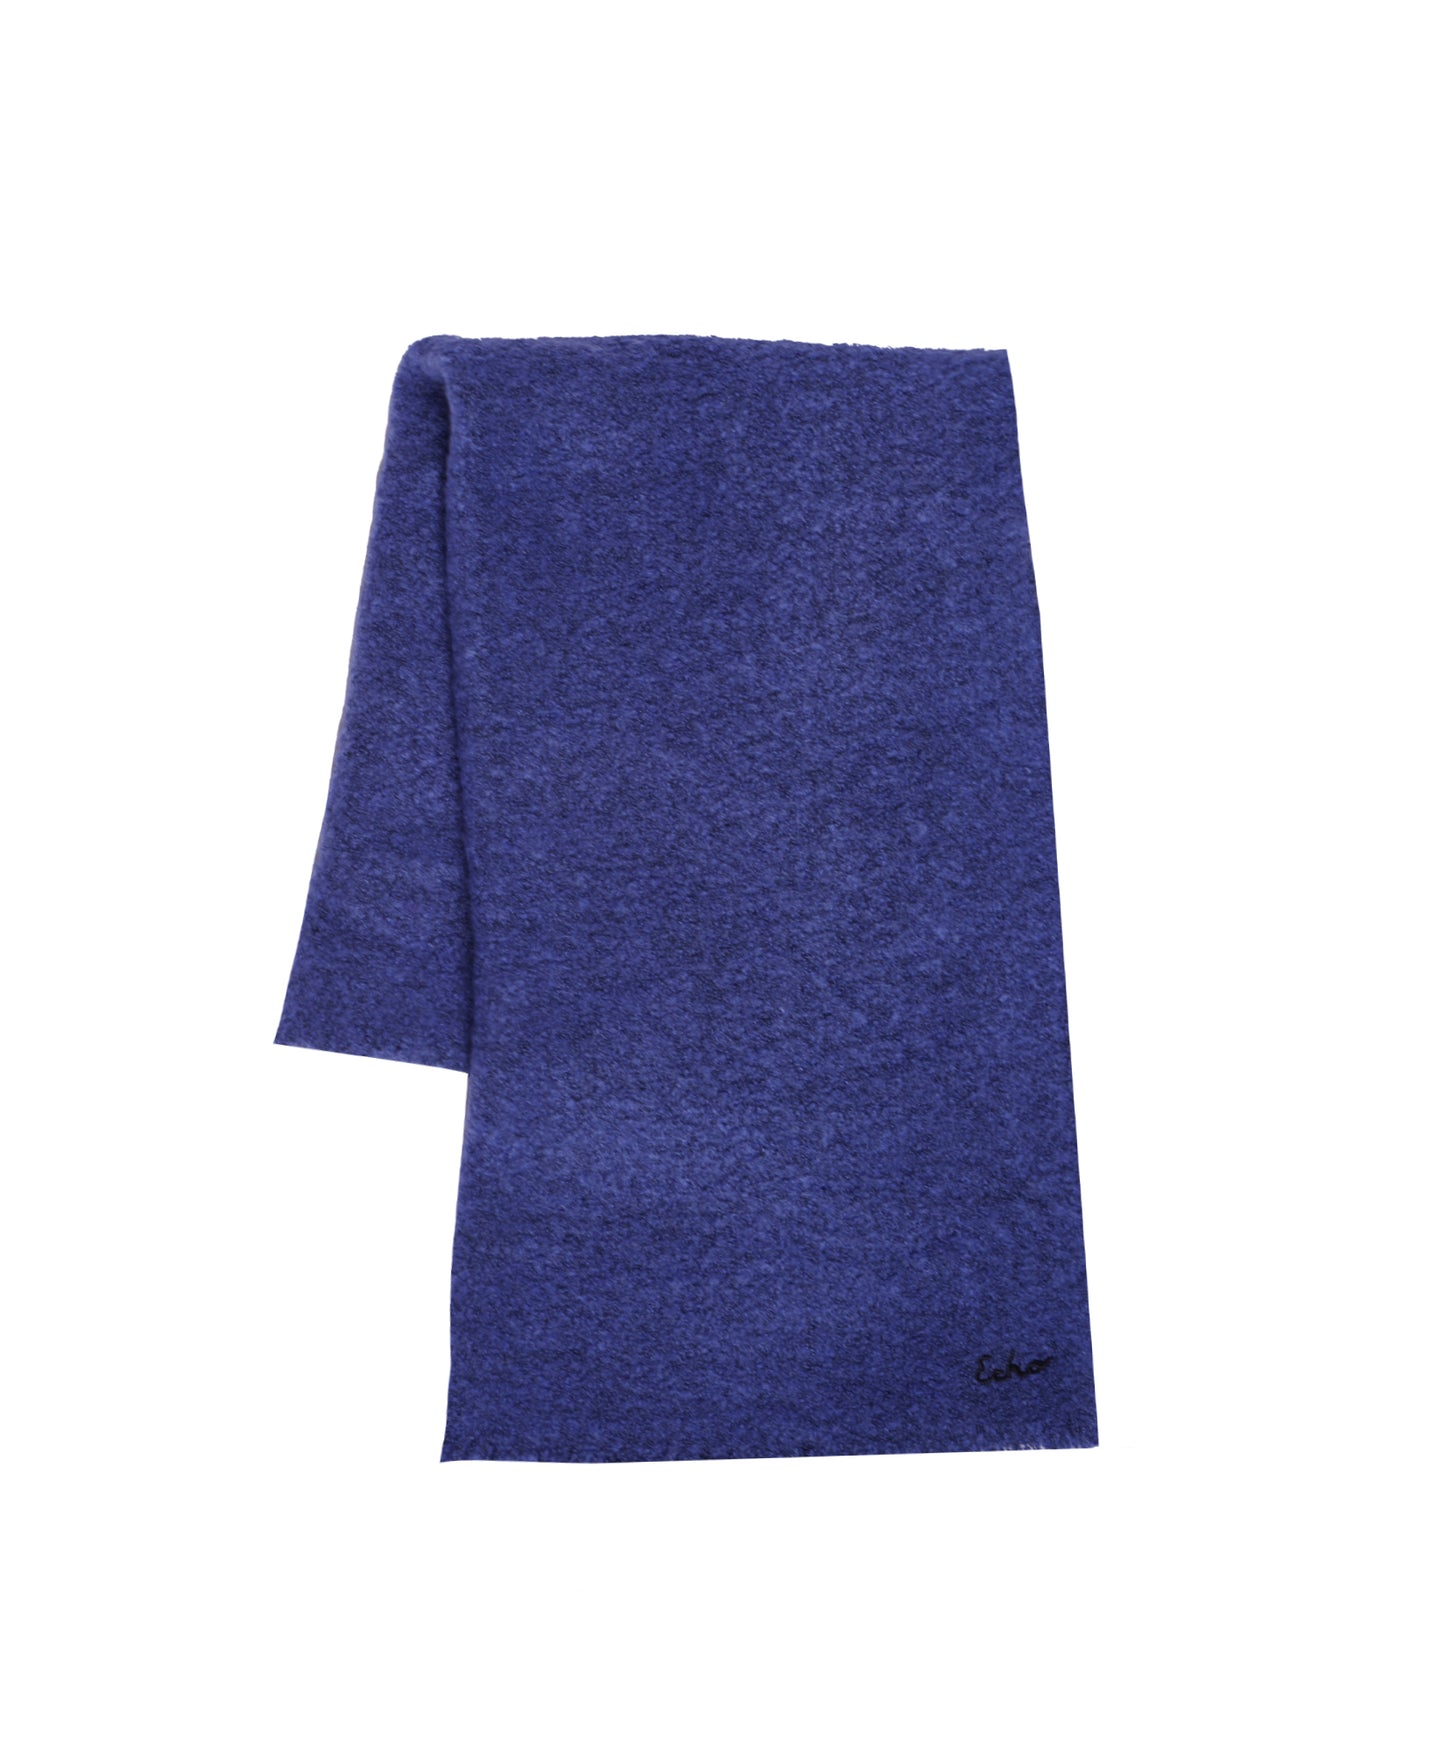 Plush Boucle Scarf in color Dazzling Blue